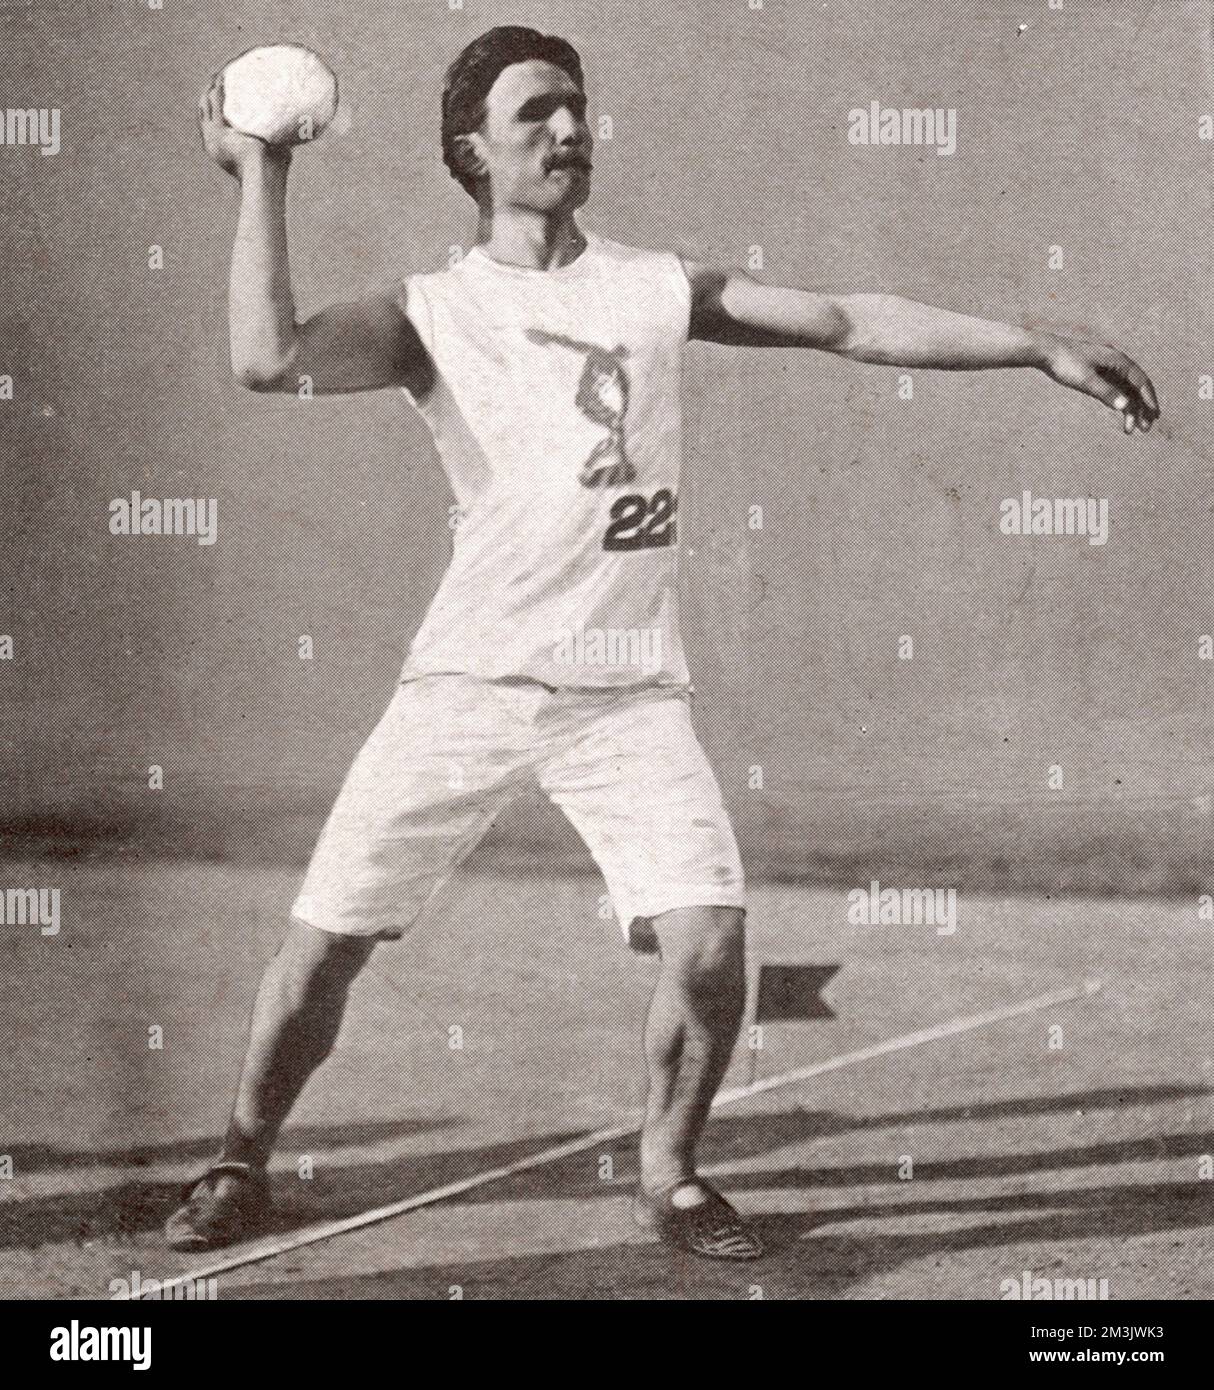 The Shot Put or 'Stone Putting' showing N. Georgantas of Greece, the winner with a throw of 19.92 1/2 metres at the 1906 Athens Summer Olympics.    The fourth modern Olympic games was staged as a celebration of the tenth anniversary of the resumption of the Games opening on May 22.     Though not official, they were very important for the Olympic movement after the failure of the 1900 and 1904 Olympics.     Date: 1906 Stock Photo